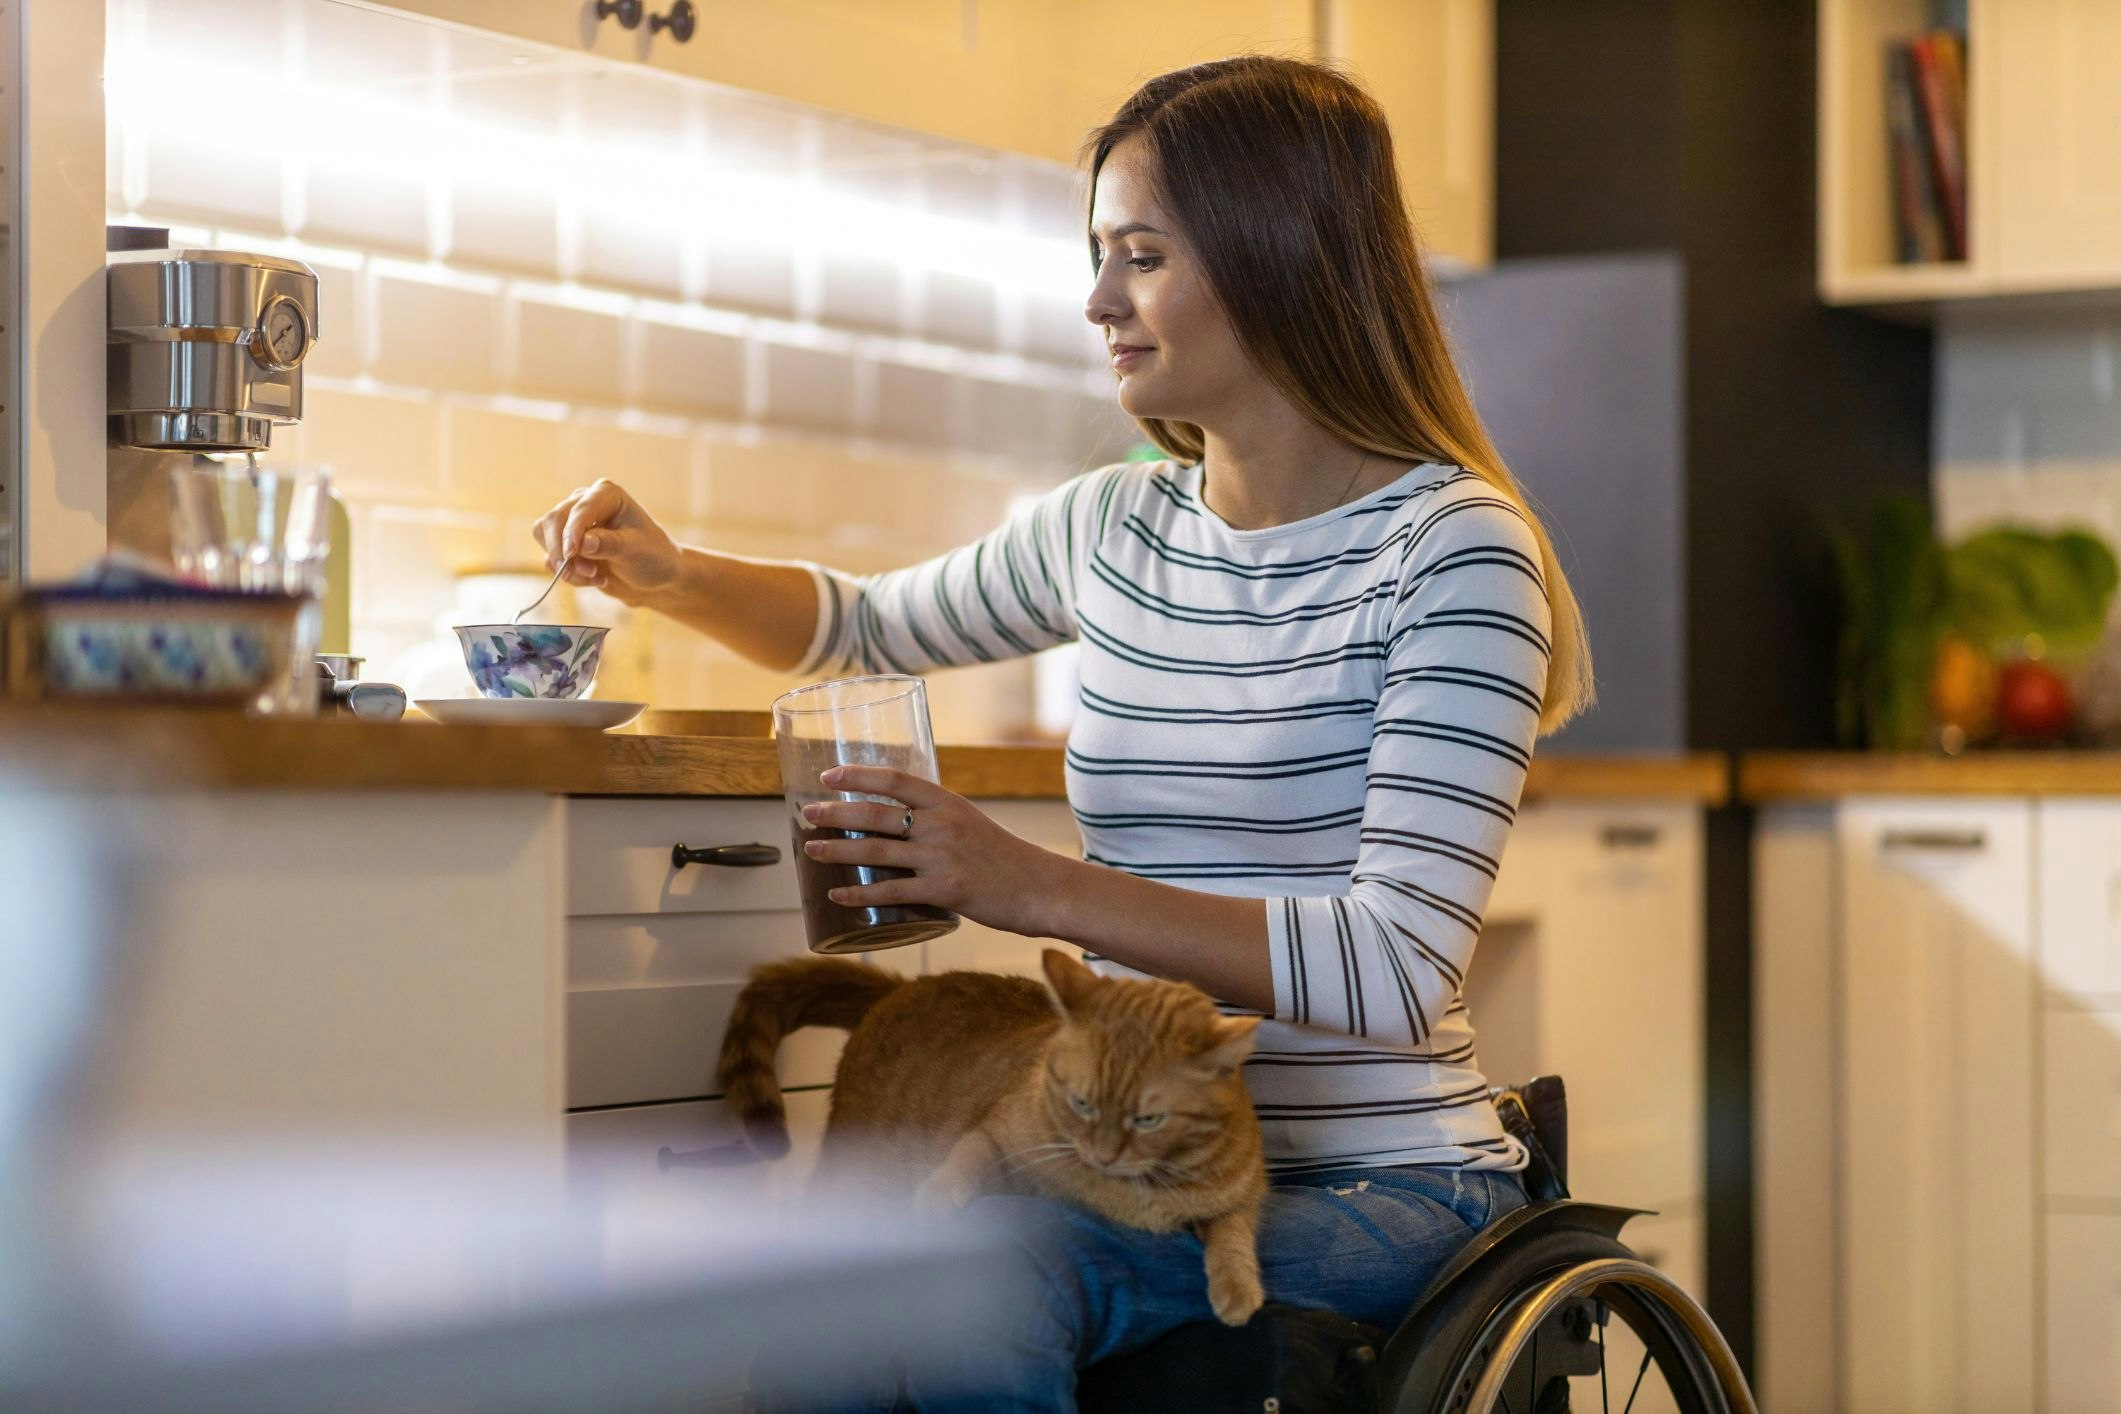 While having ramps may make a house more accessible, other factors also need to be considered when choosing housing as a person with disability. [Source: Shutterstock]
